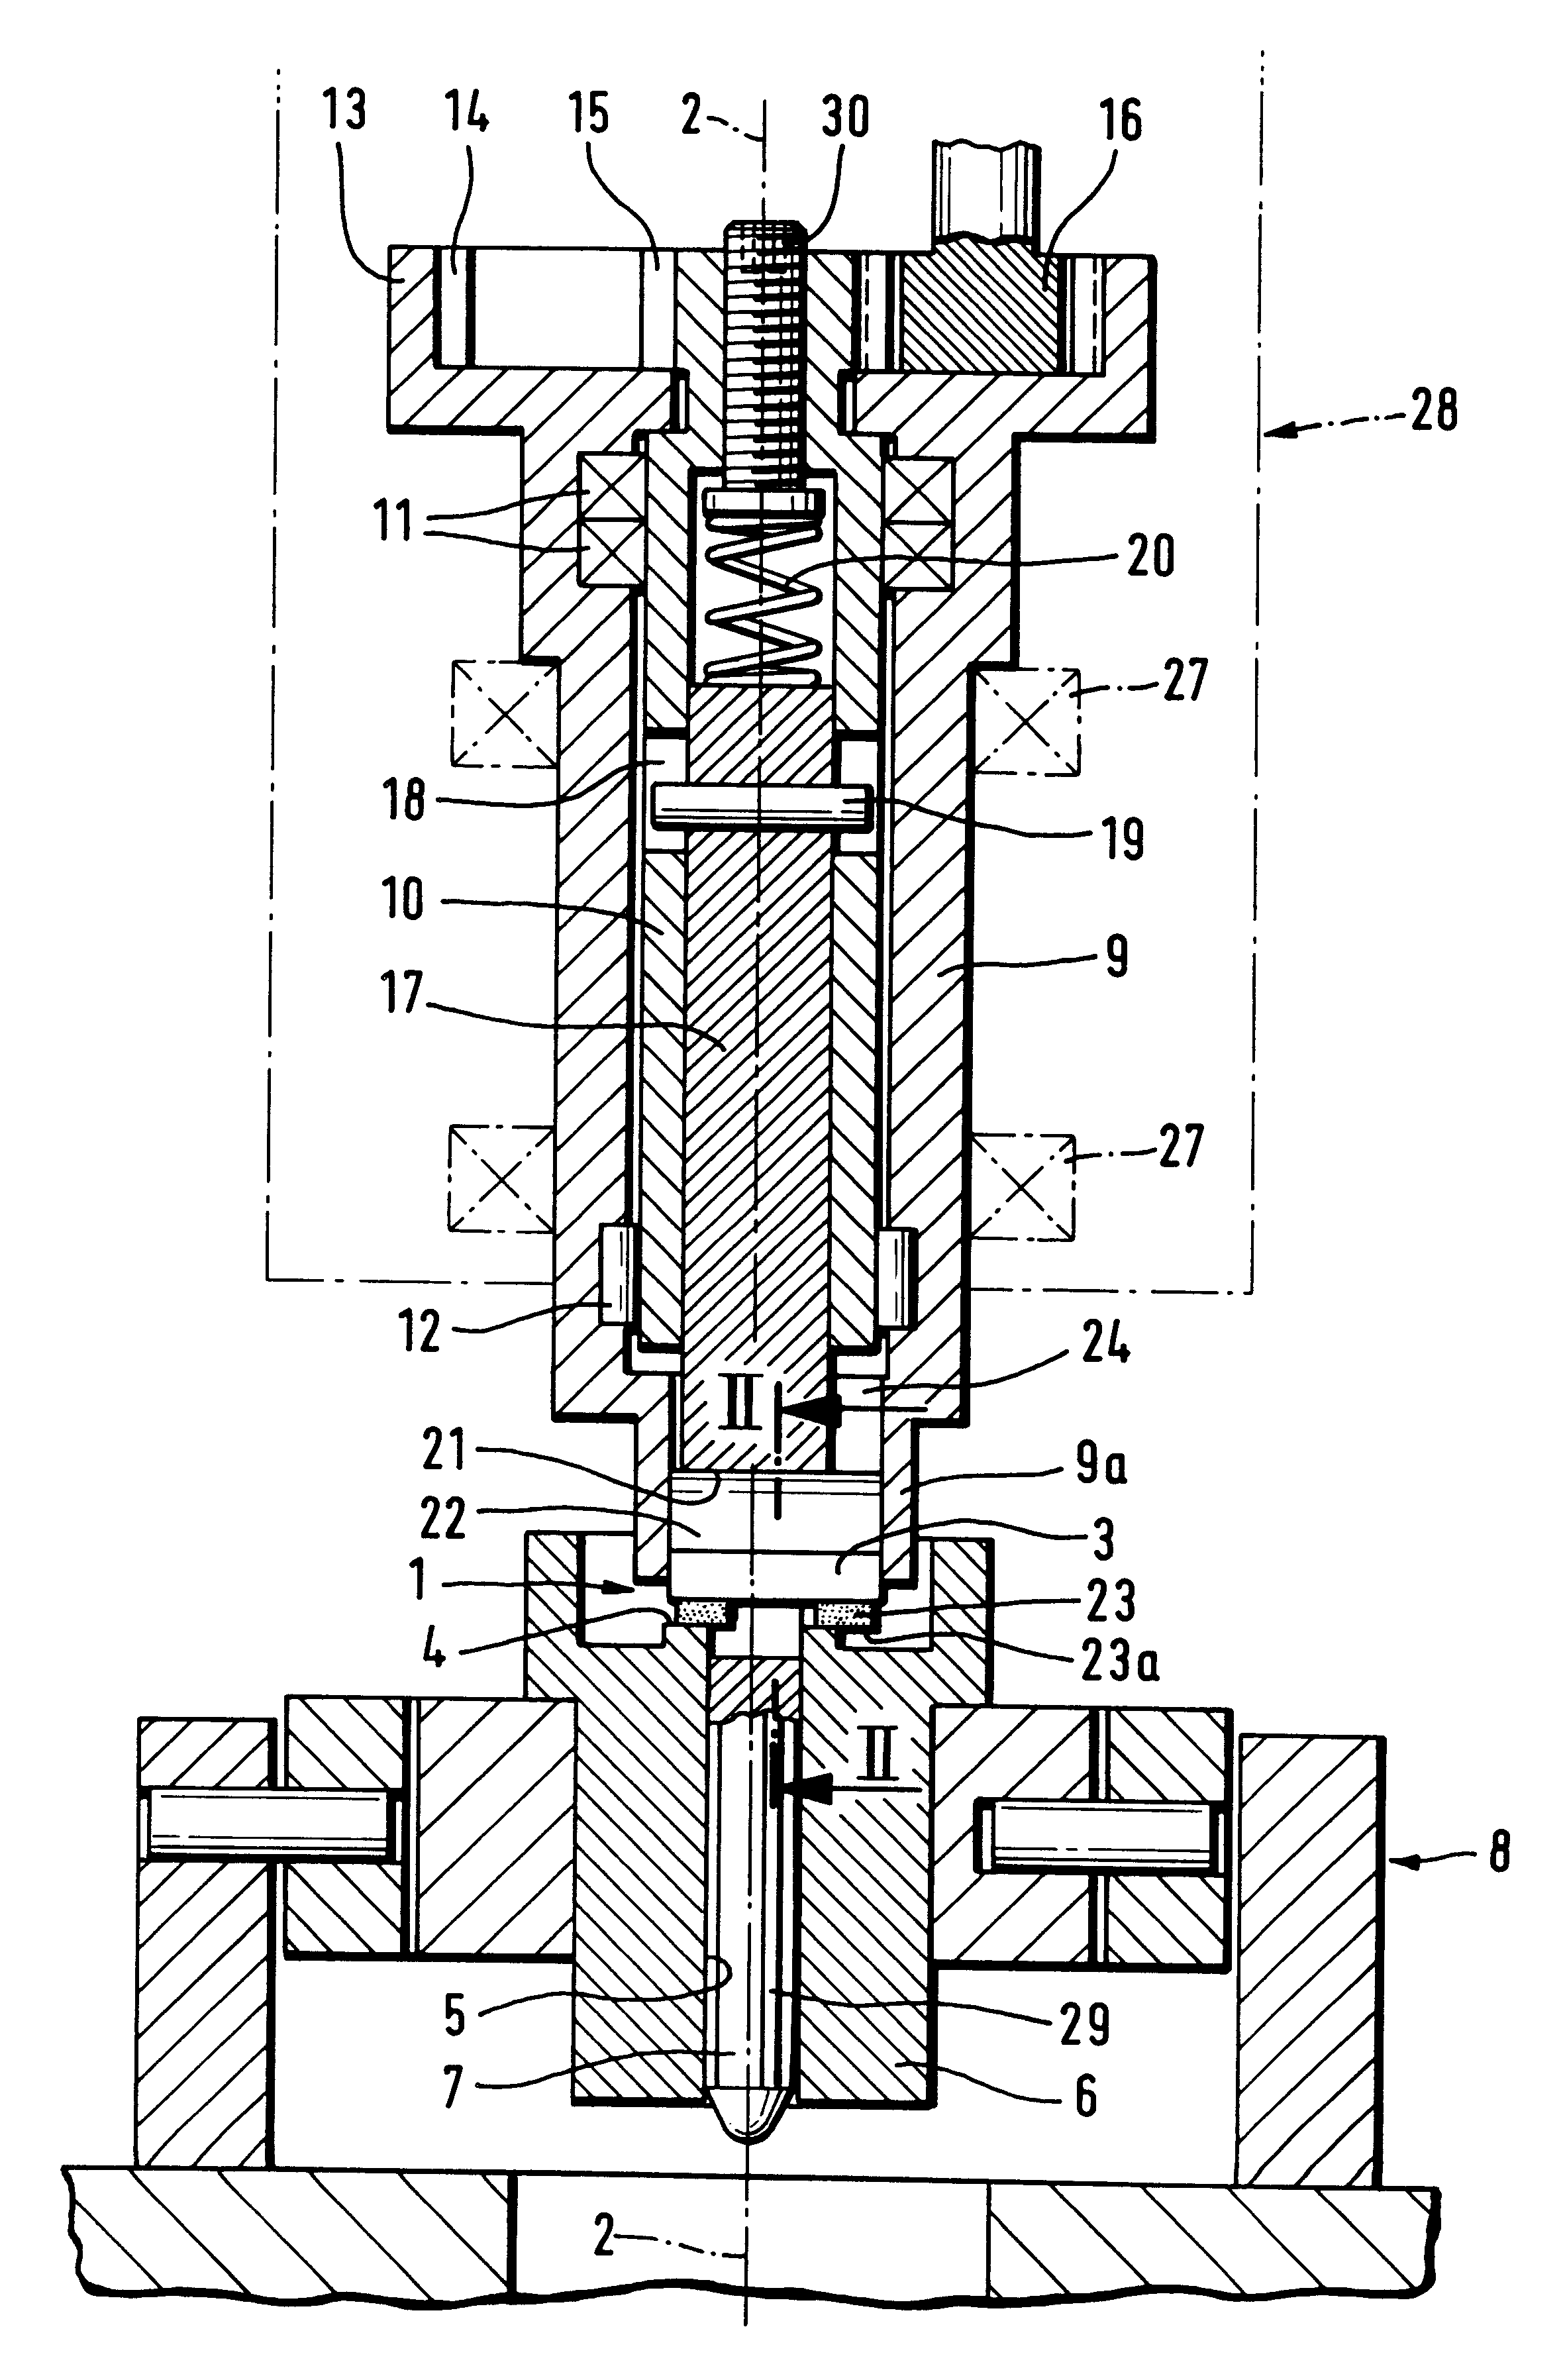 Device for grinding an end face, especially an annular surface at the edge of a workpiece bore